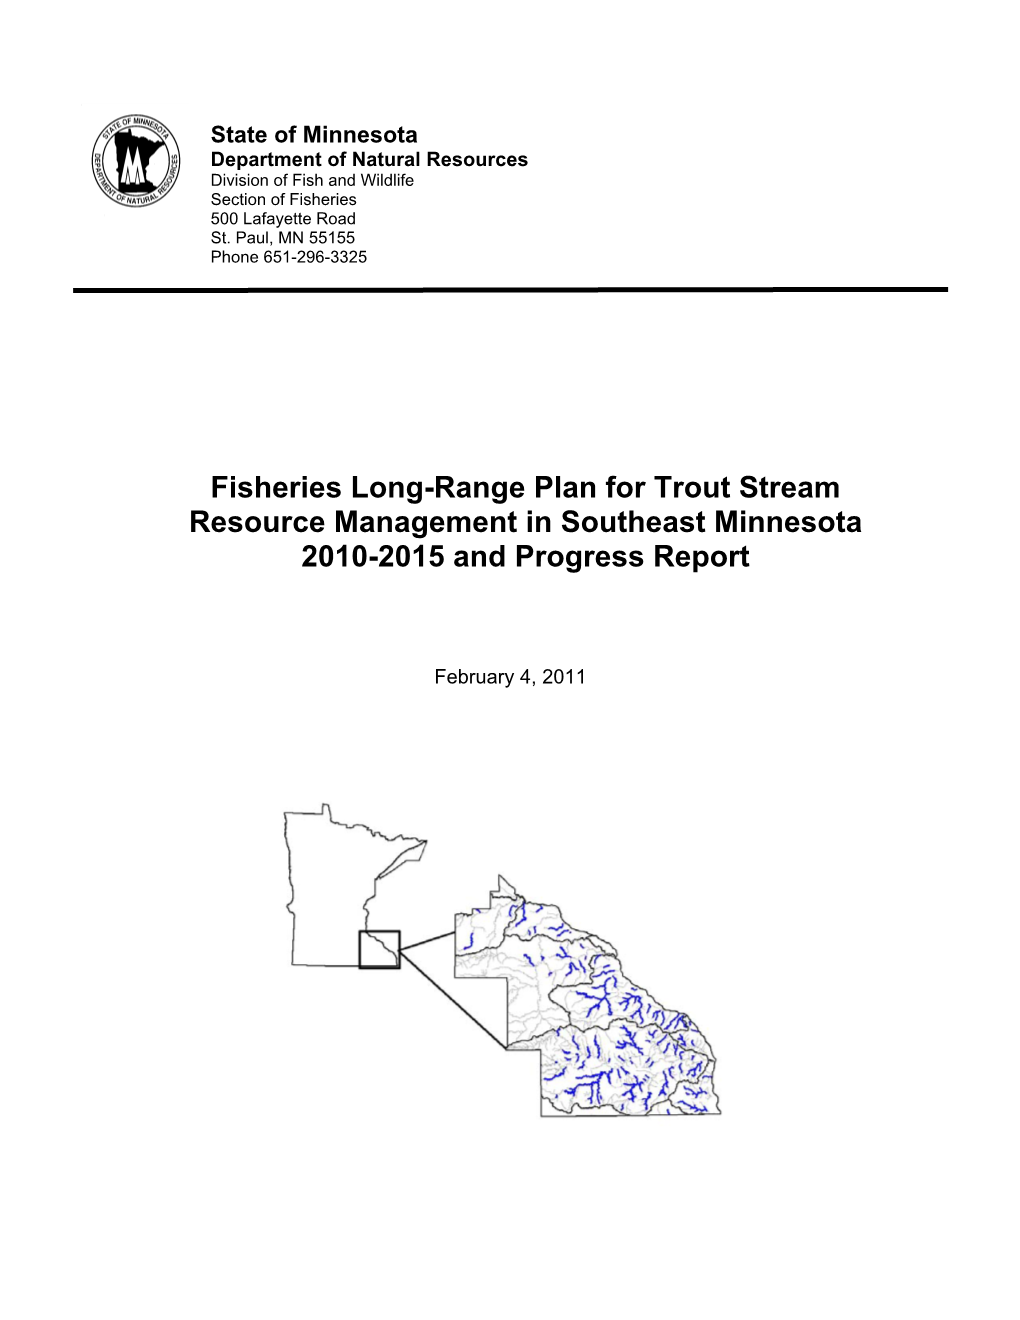 Fisheries Long-Range Plan for Trout Stream Resource Management in Southeast Minnesota 2010-2015 and Progress Report